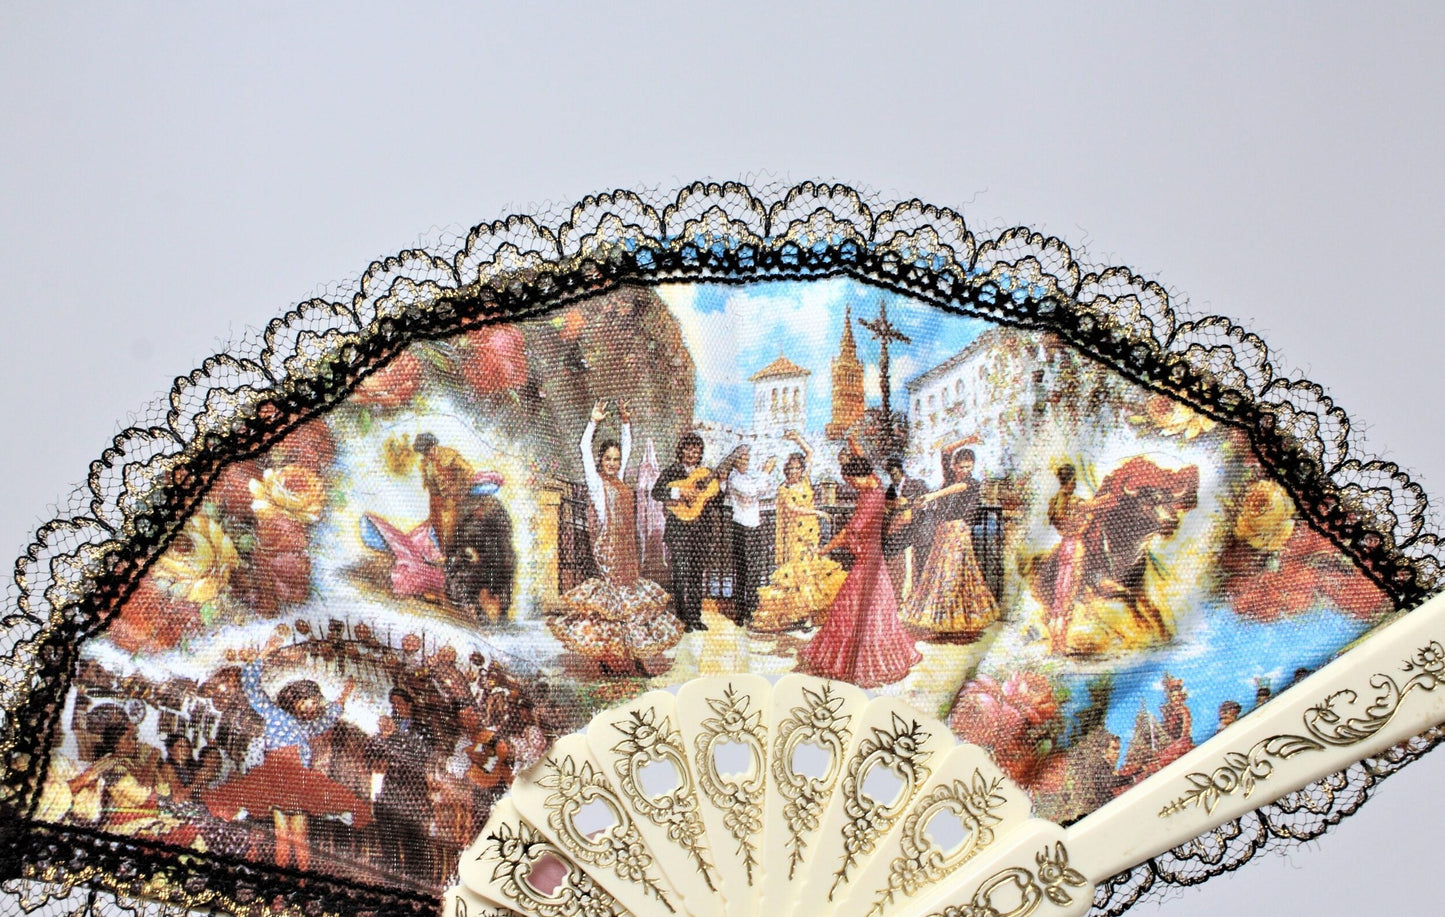 Hand Fan, Spanish Style, Flamenco Dancers / Bull Fighters, Printed Cloth, Small, Set of 2, Vintage